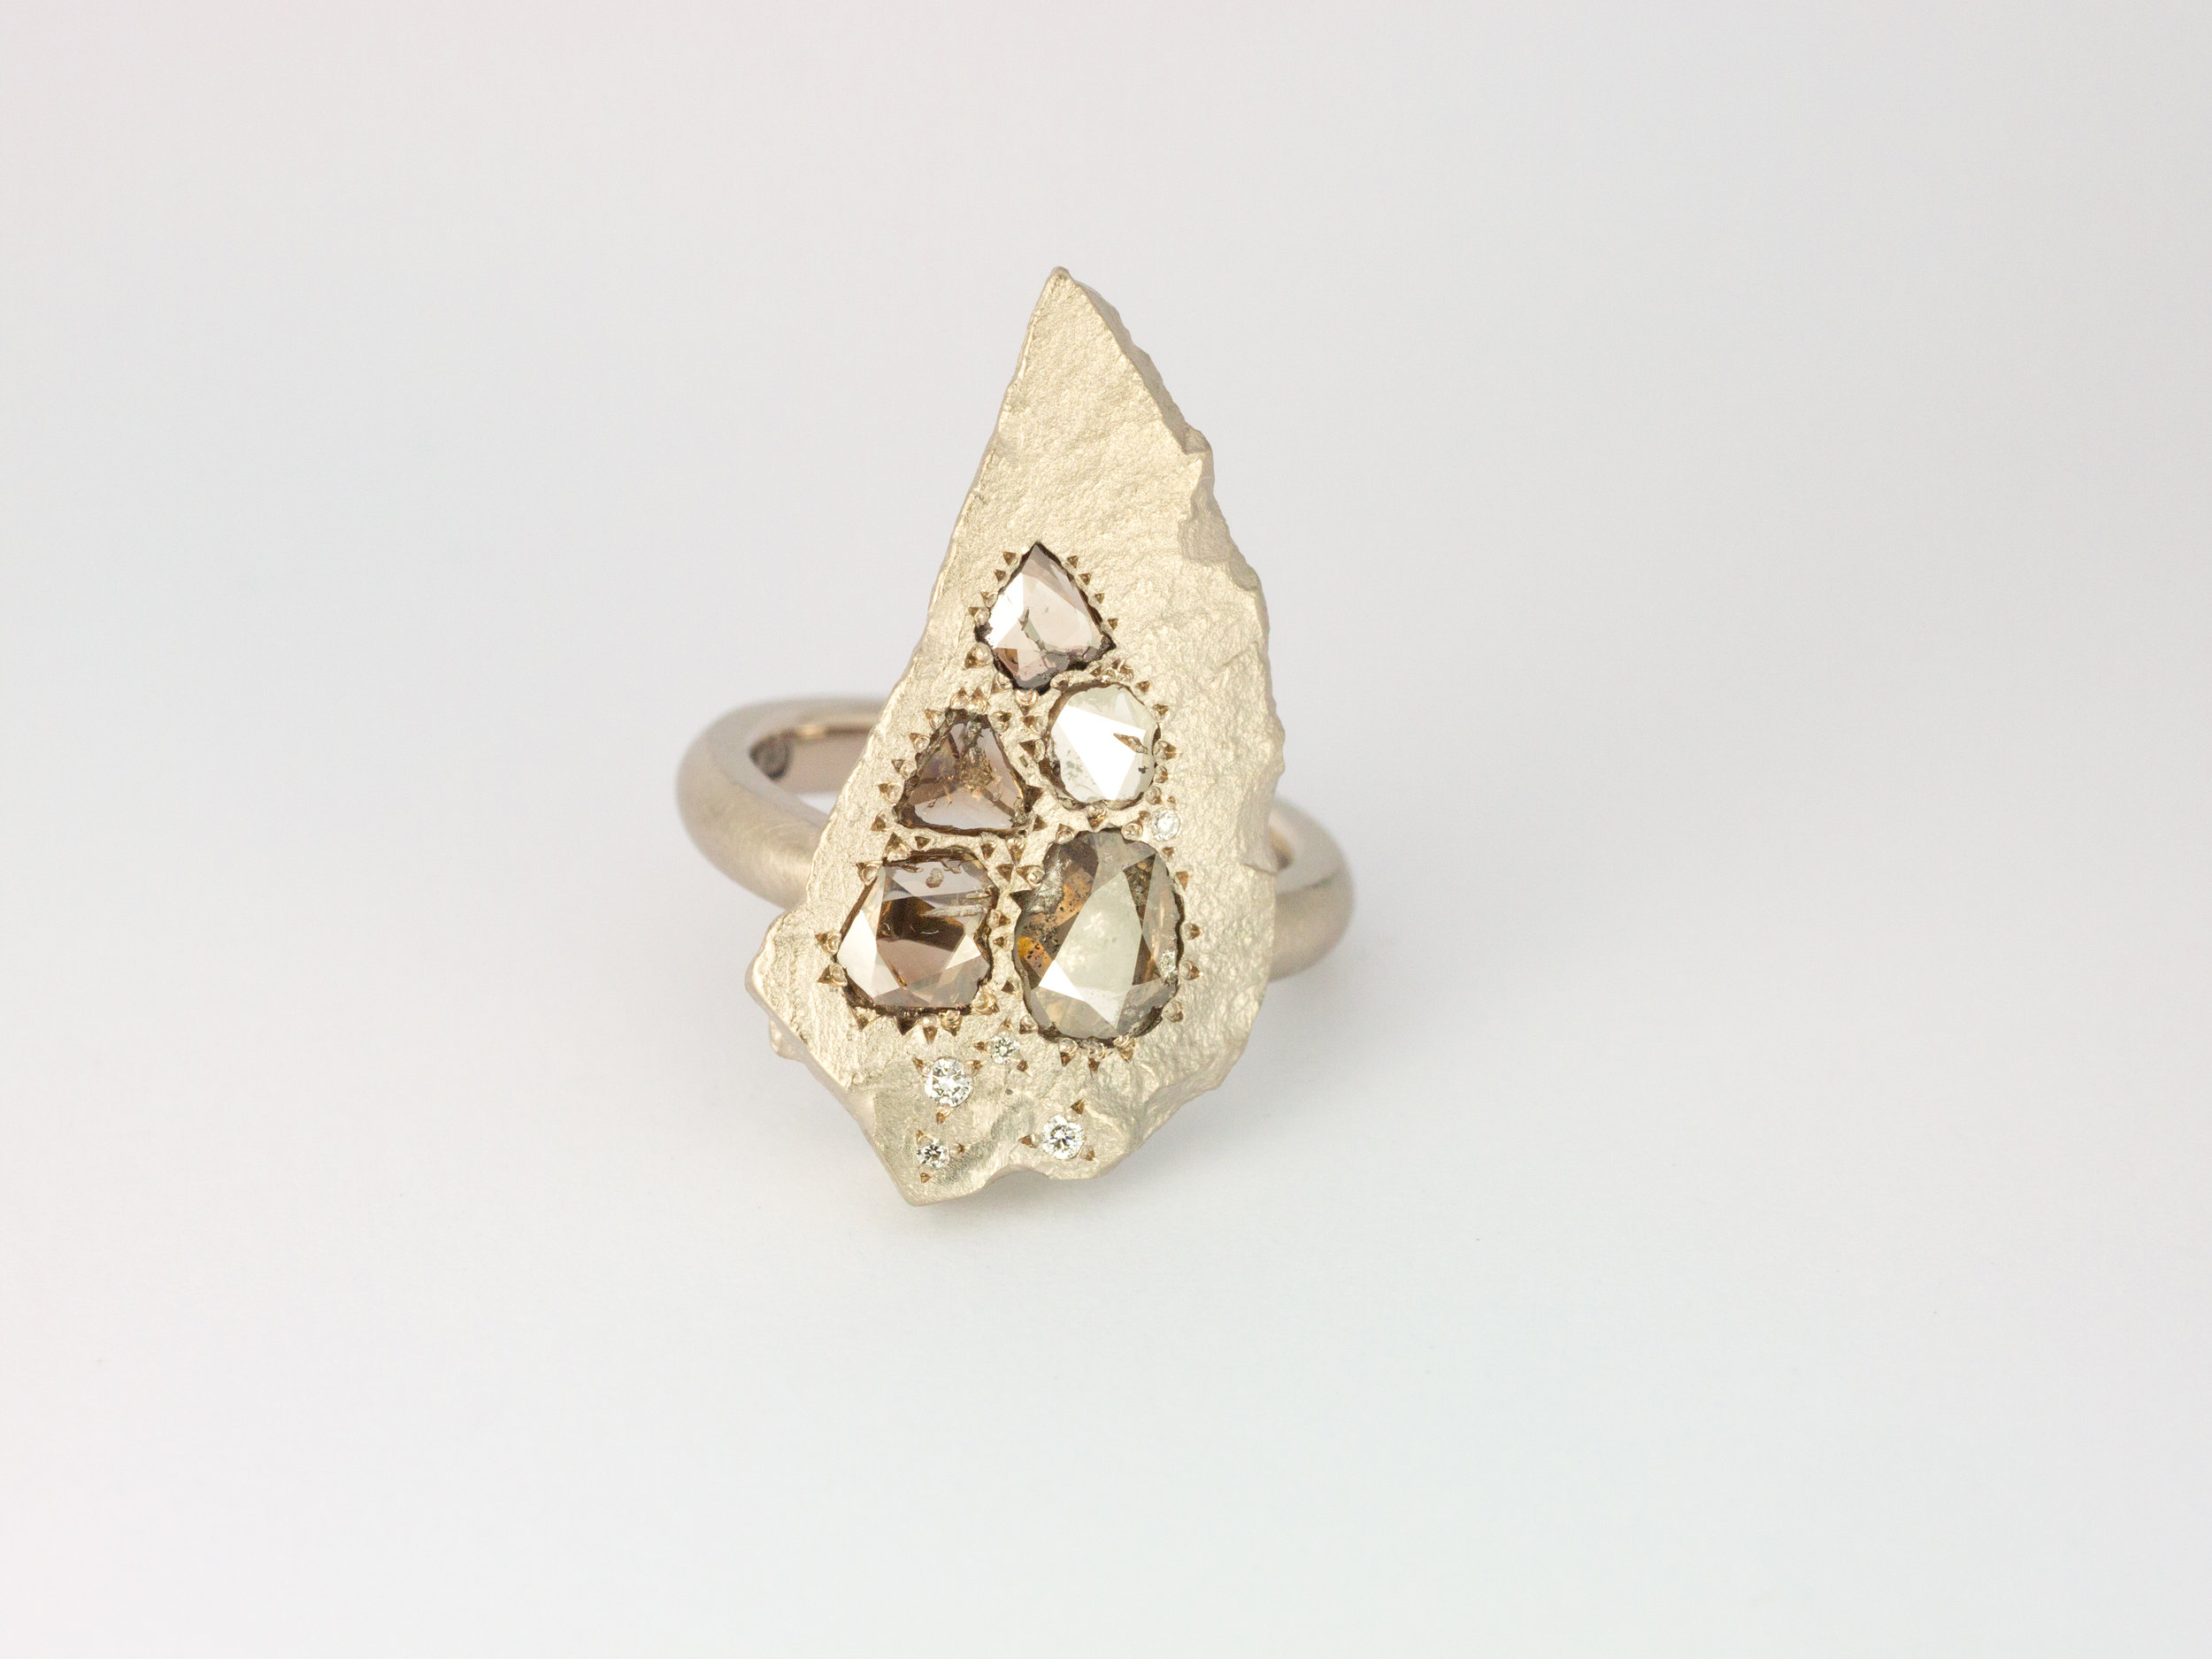  White gold rock engagement ring with rose cut diamonds 